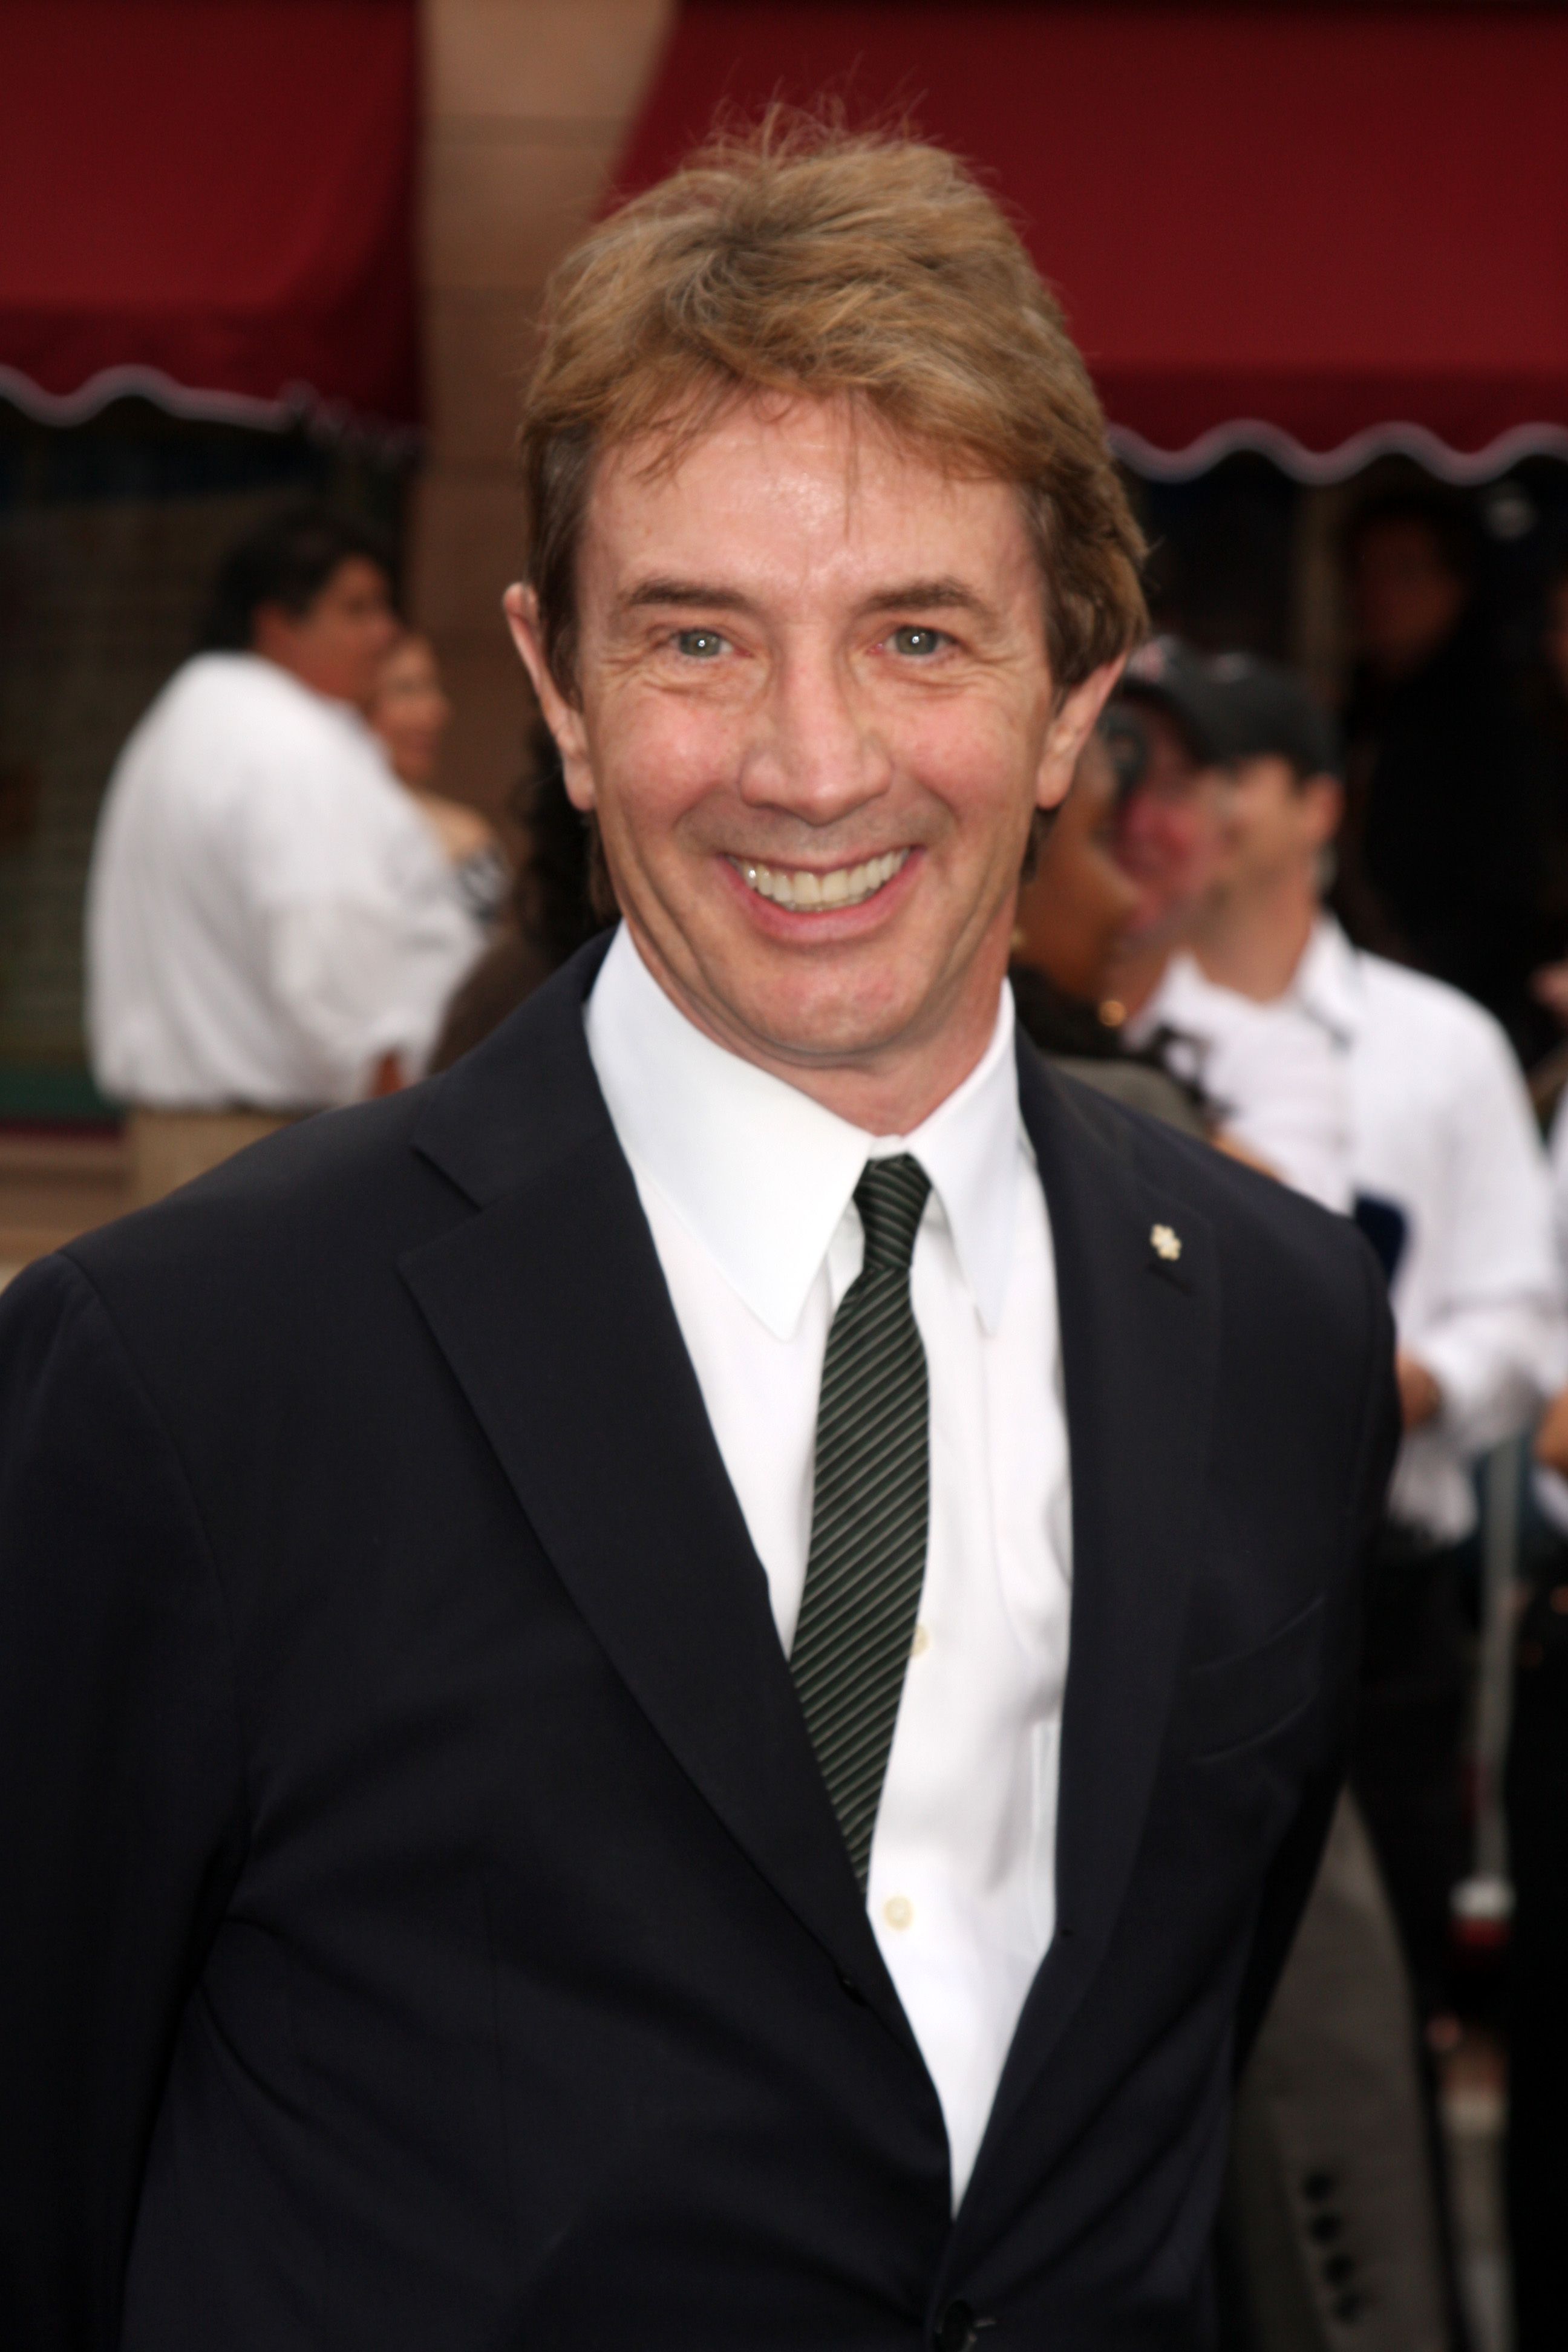 Martin Short smiles in a suit and tie.